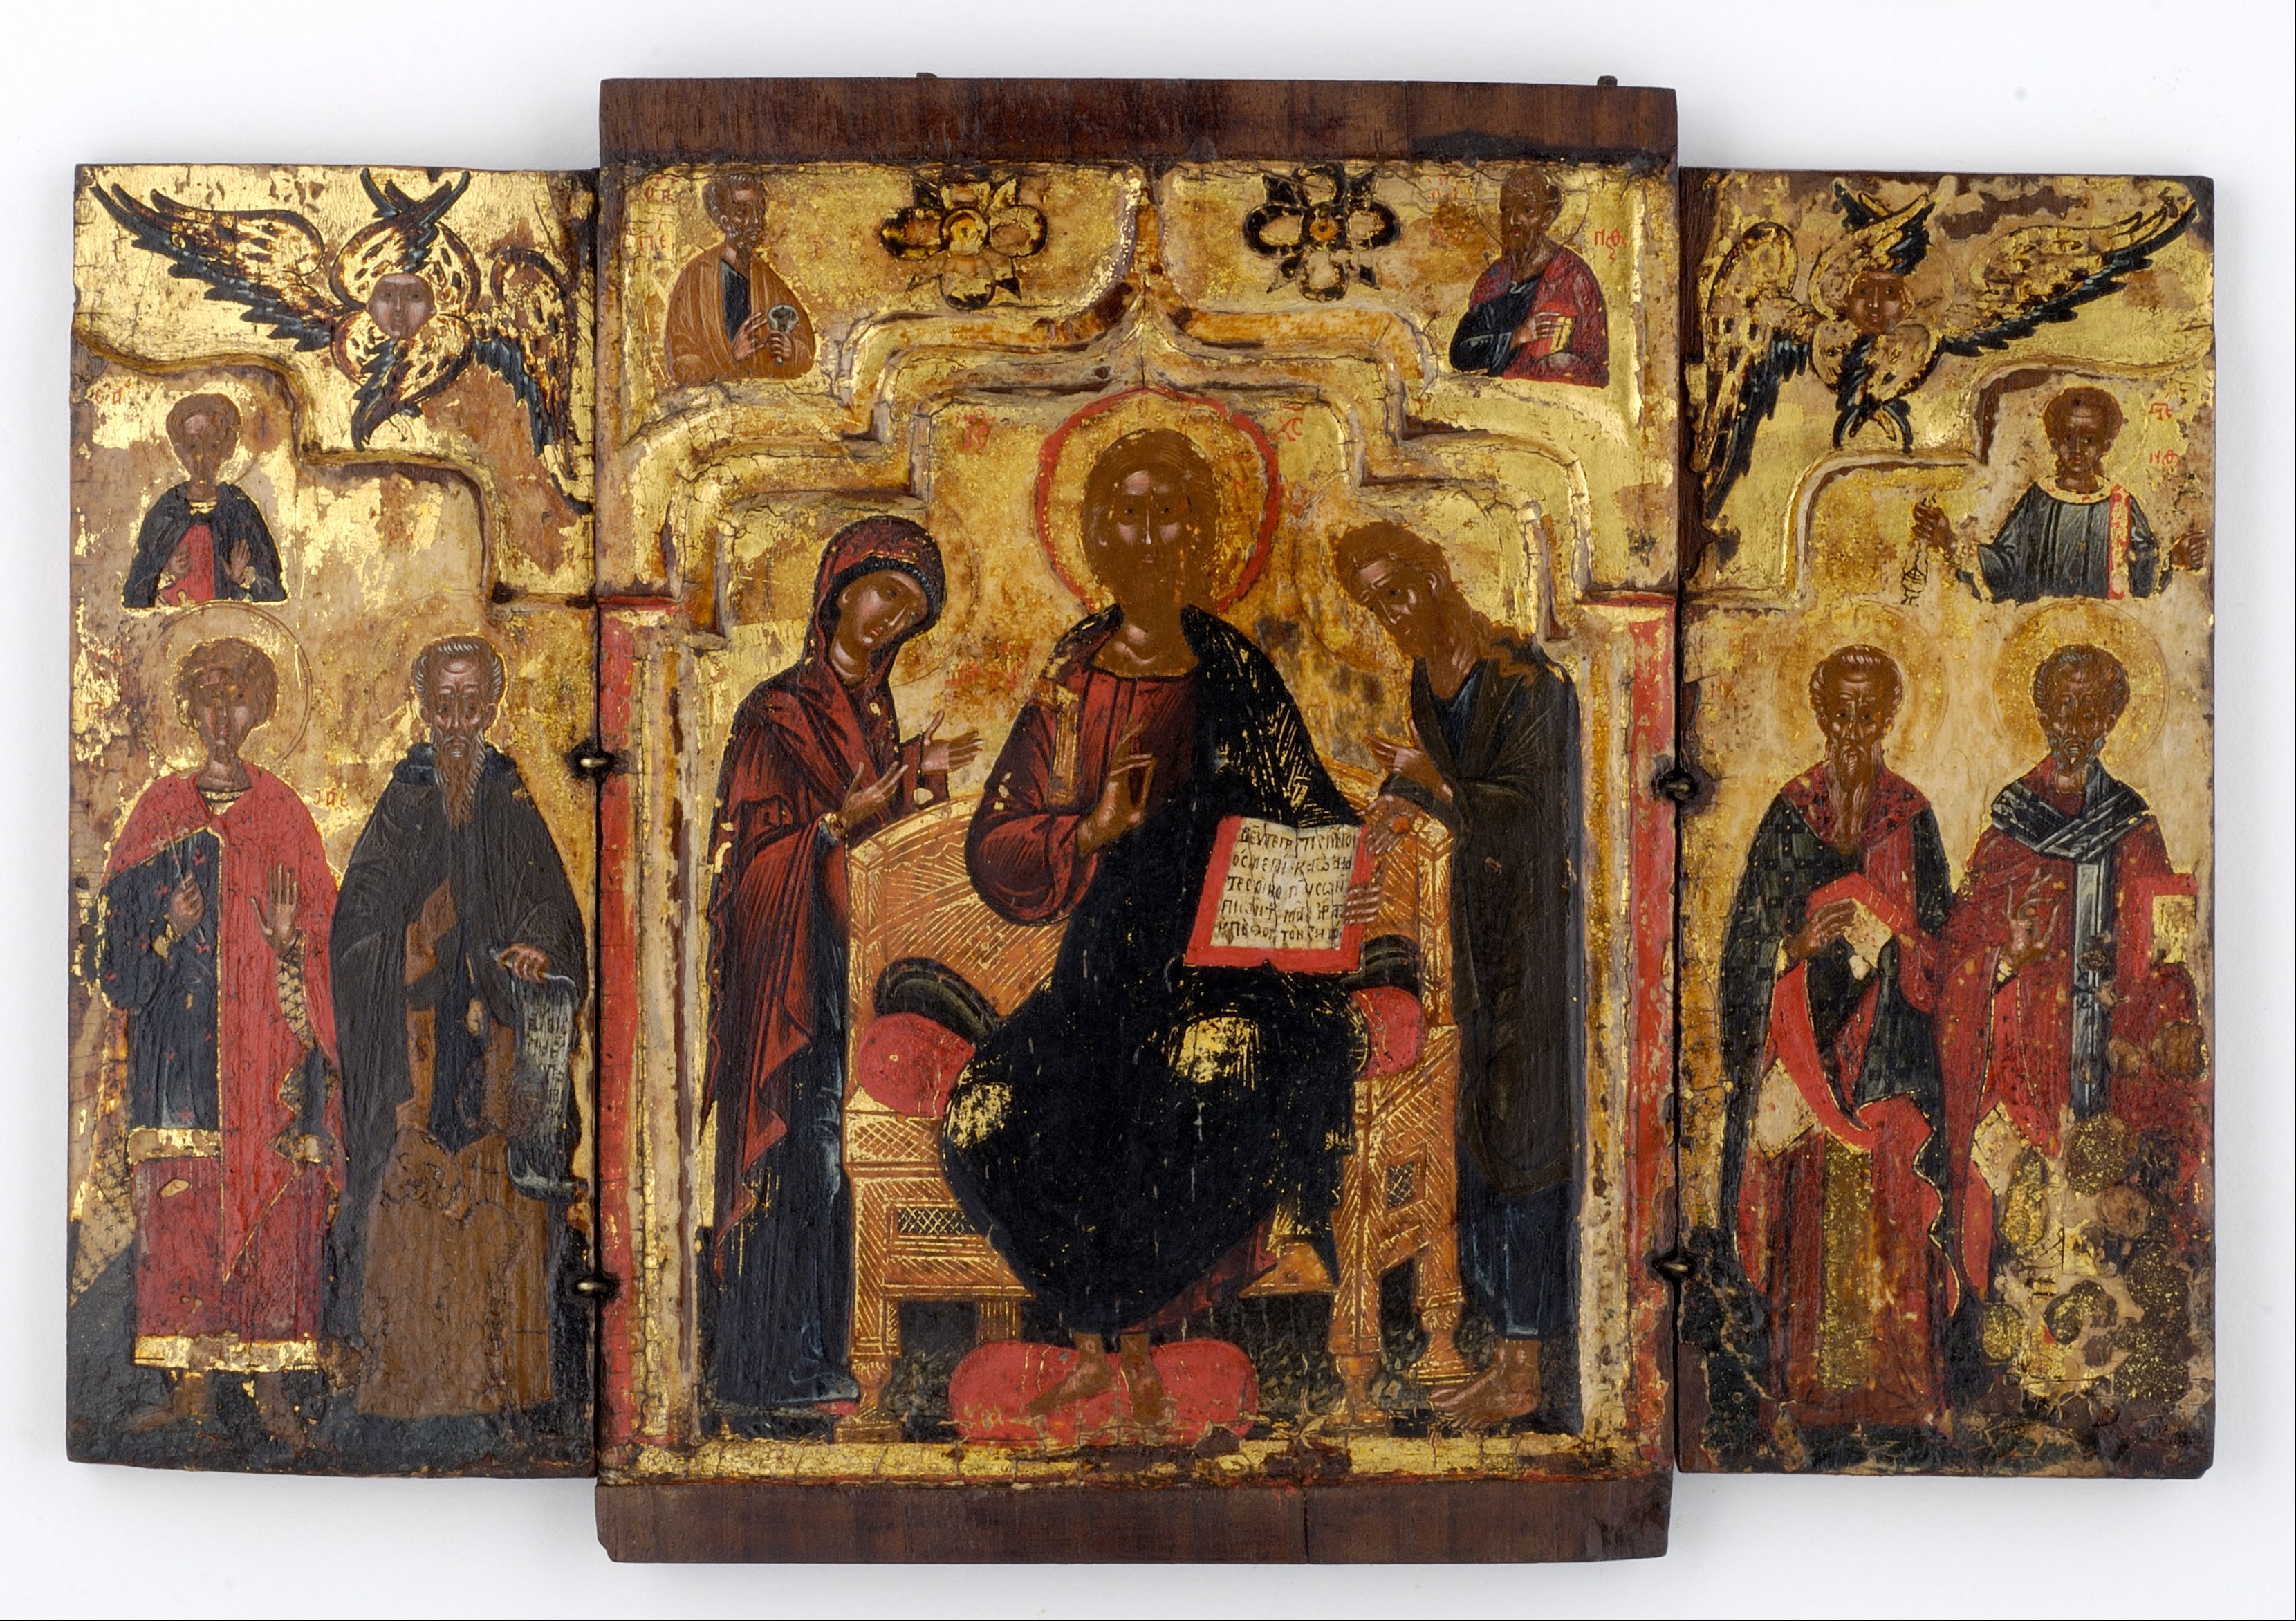 The Deesis (Intercession) flanked by saints - Google Art Project